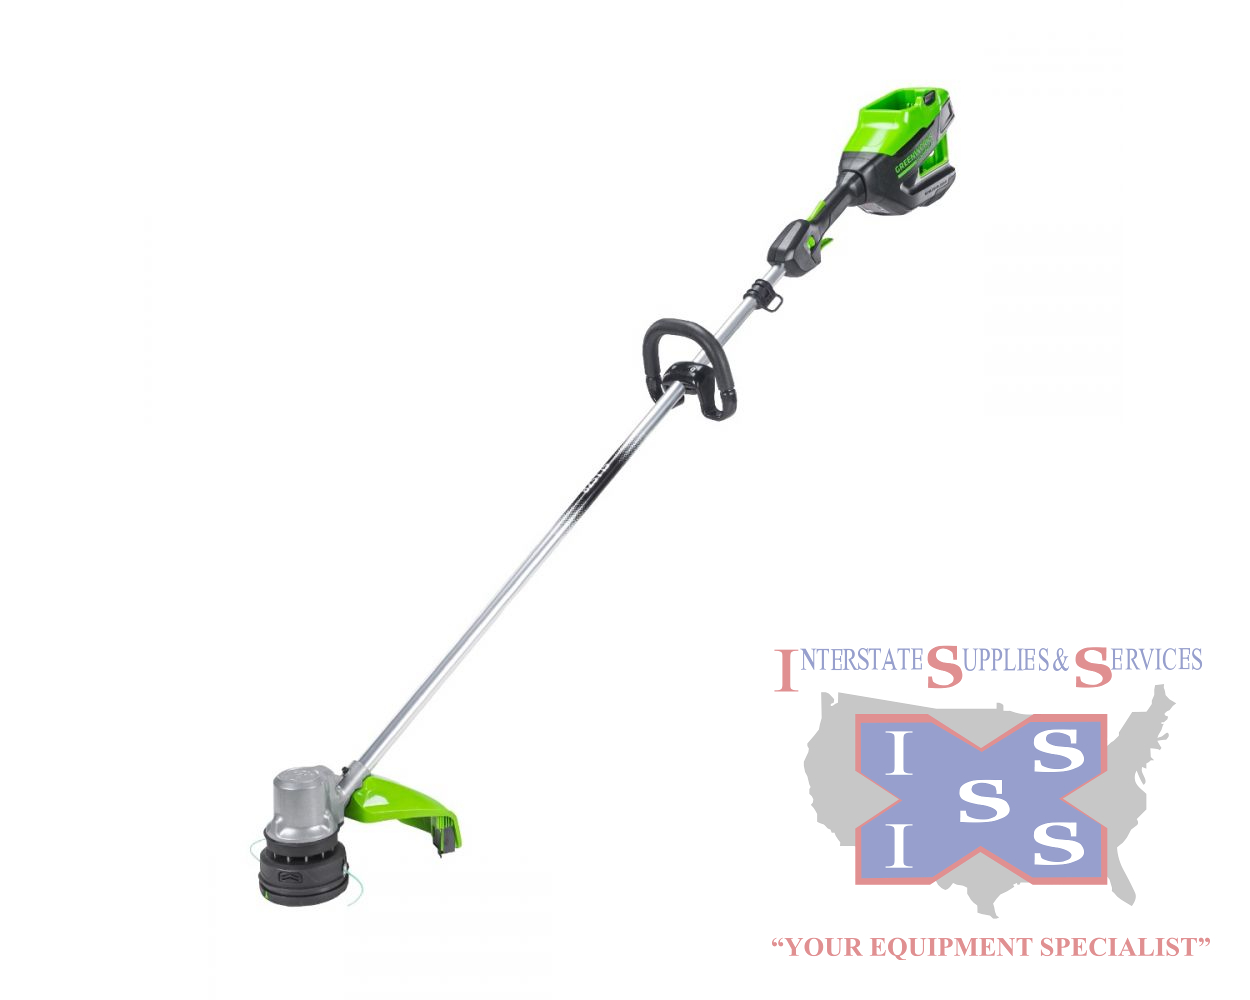 82ST15 82V GEN II 1.5kW FRONT-MOUNT STRING TRIMMER (TOOL ONLY) - Click Image to Close